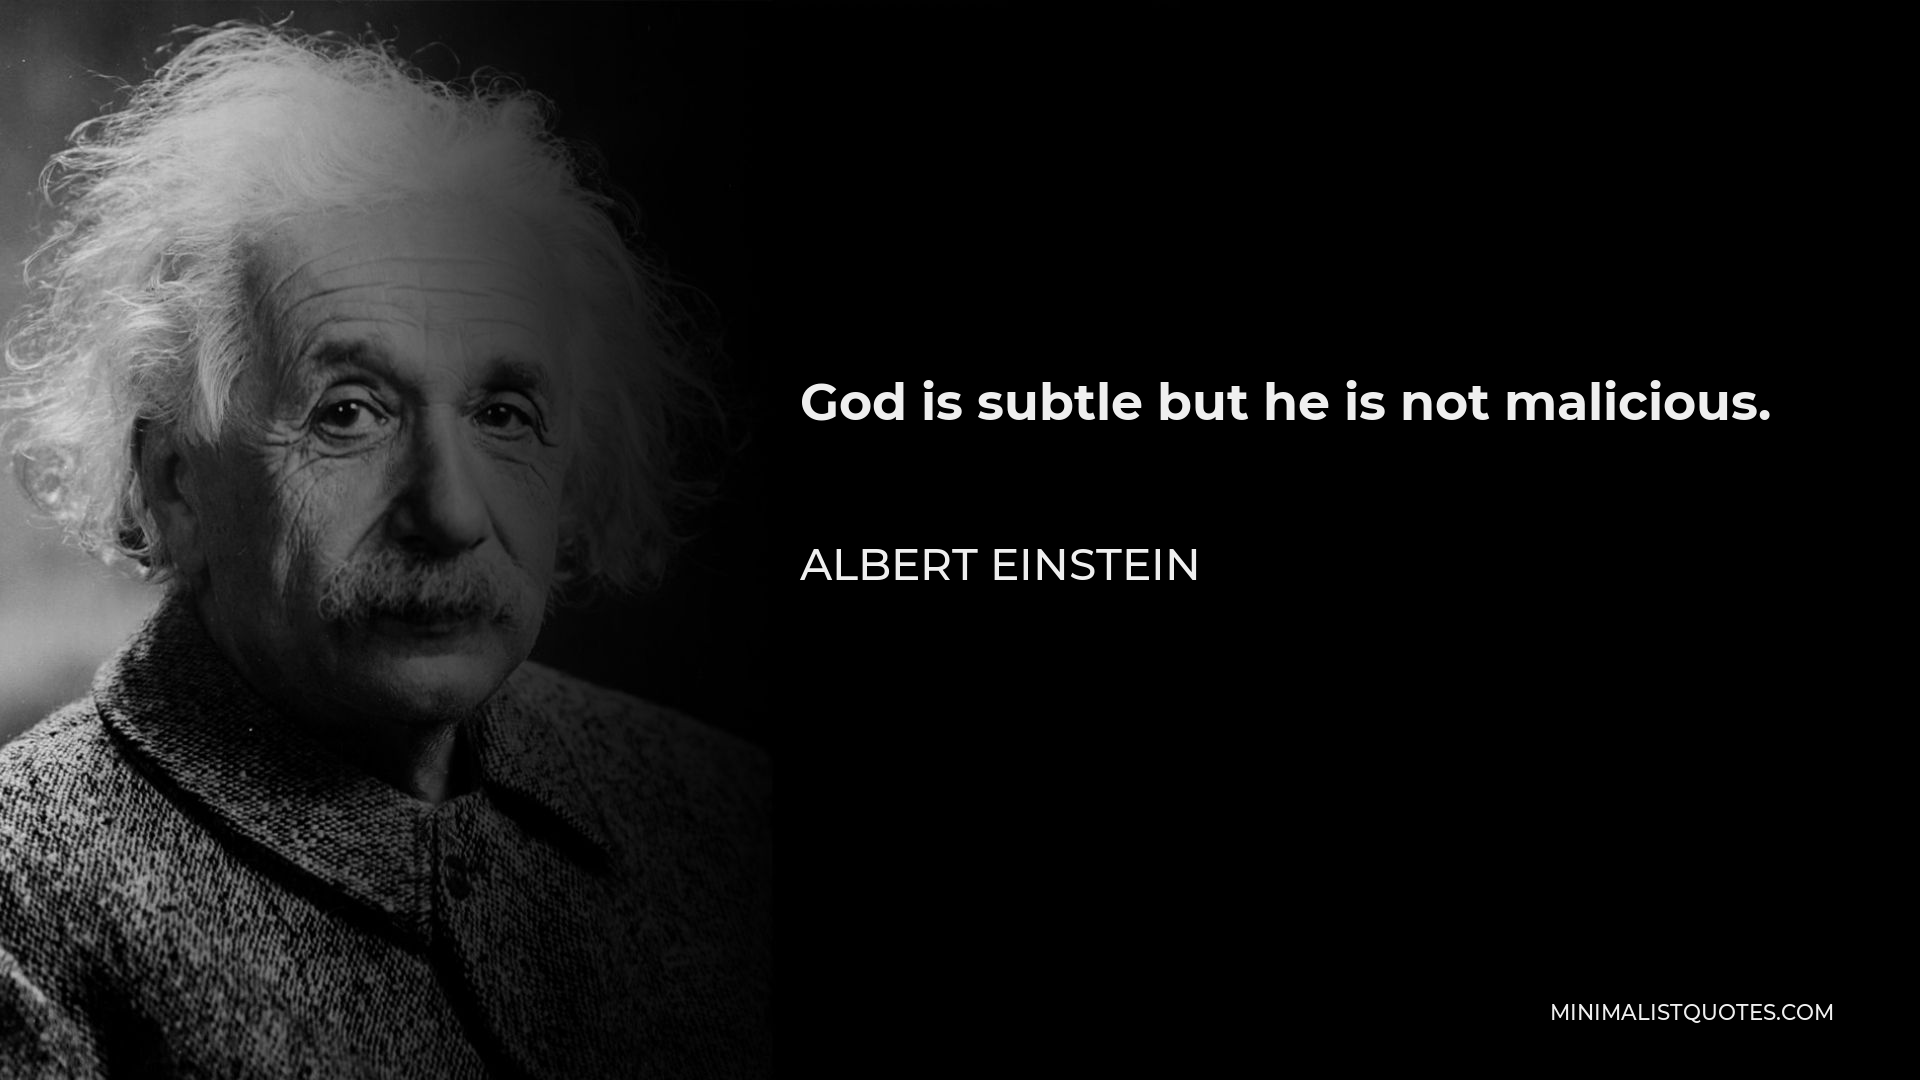 Albert Einstein Quote - God is subtle but he is not malicious.